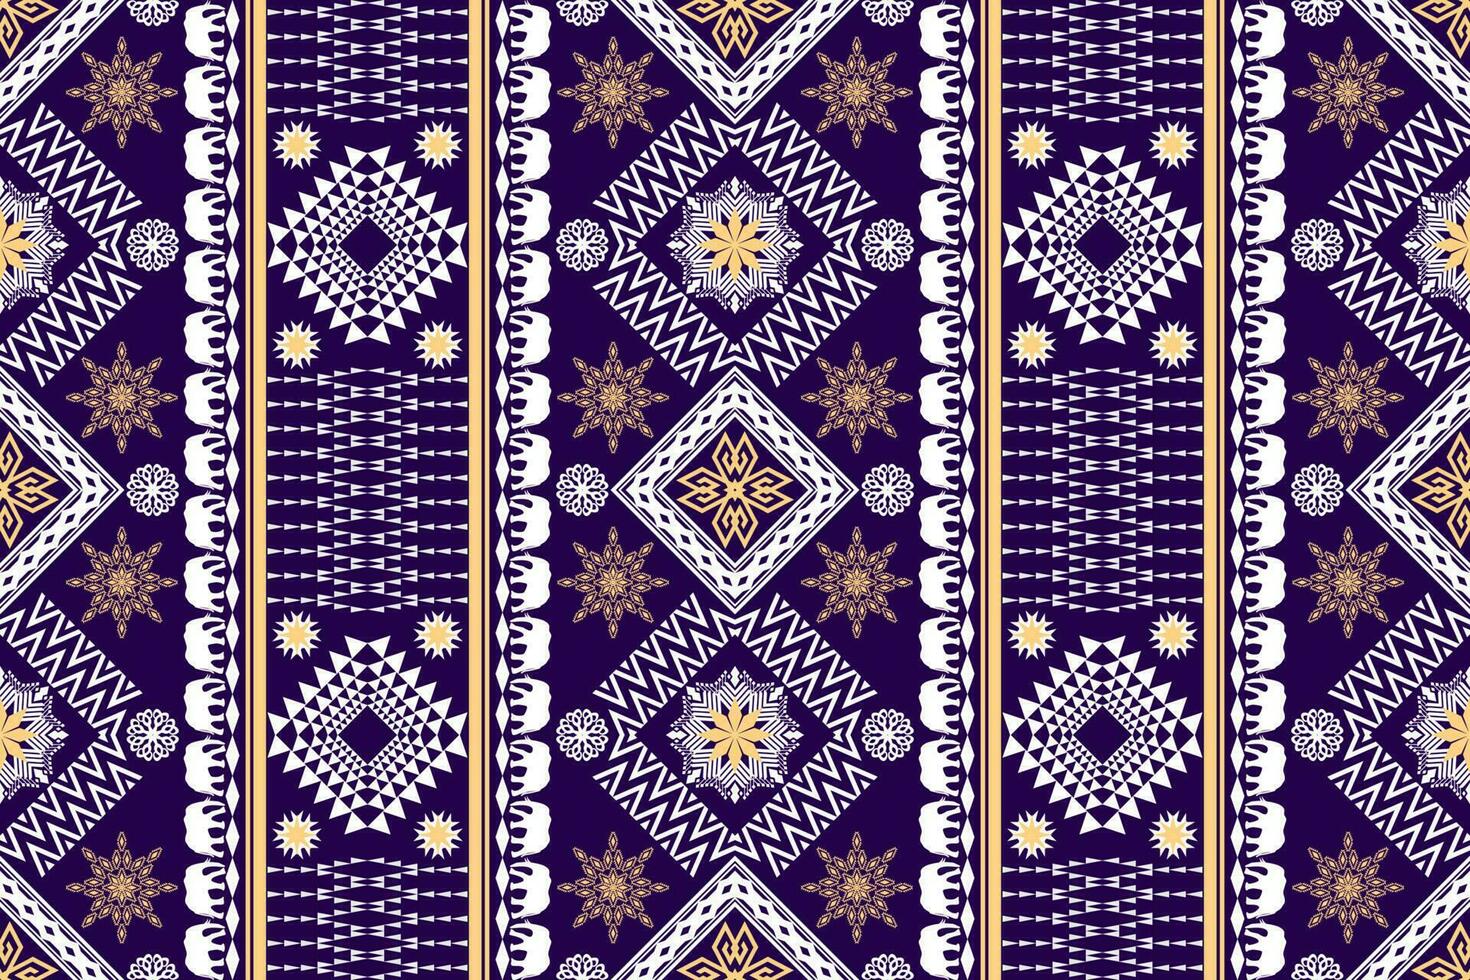 Geometric ethnic oriental traditional art pattern.Figure aztec embroidery style.Design for ethnic background,wallpaper,clothing,wrapping,fabric,element,sarong,vector illustration vector